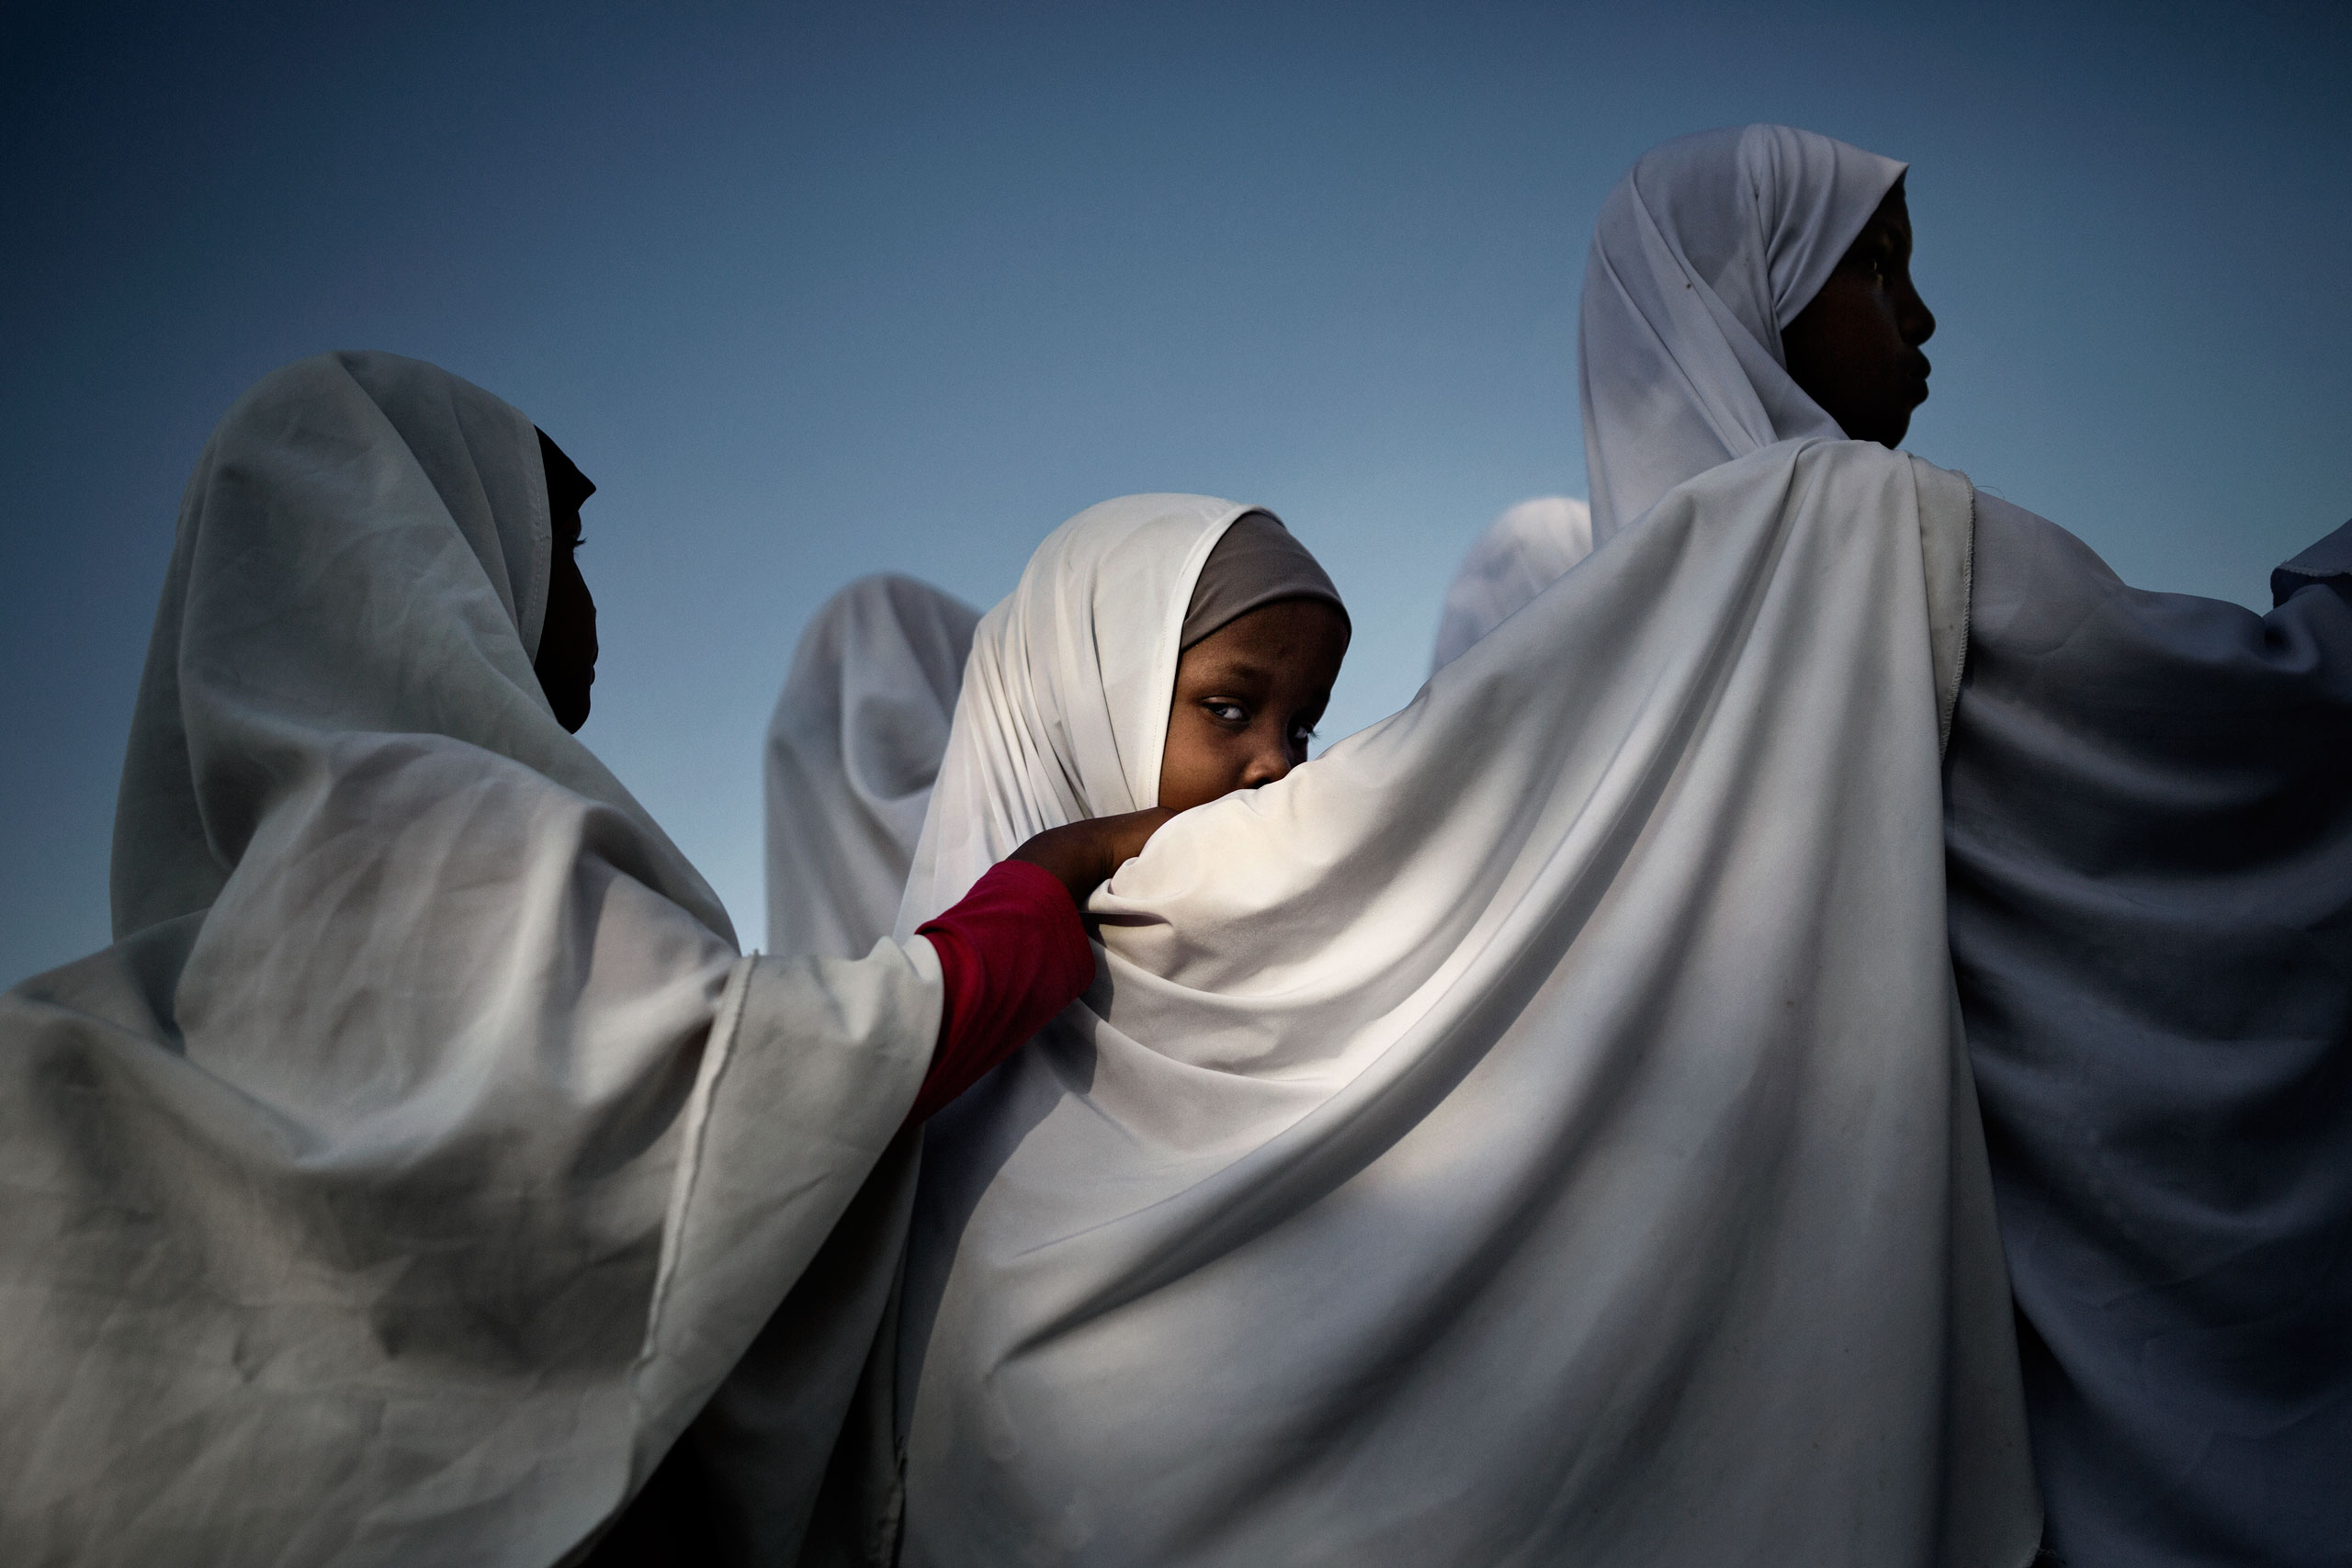 Female students in the courtyard of the Haji Mire Primary School in Bosaso, Somalia. The school has nine classes and students are taught English, Arabic, Mathematics, Physics and they also study the Koran. October 6, 2015.